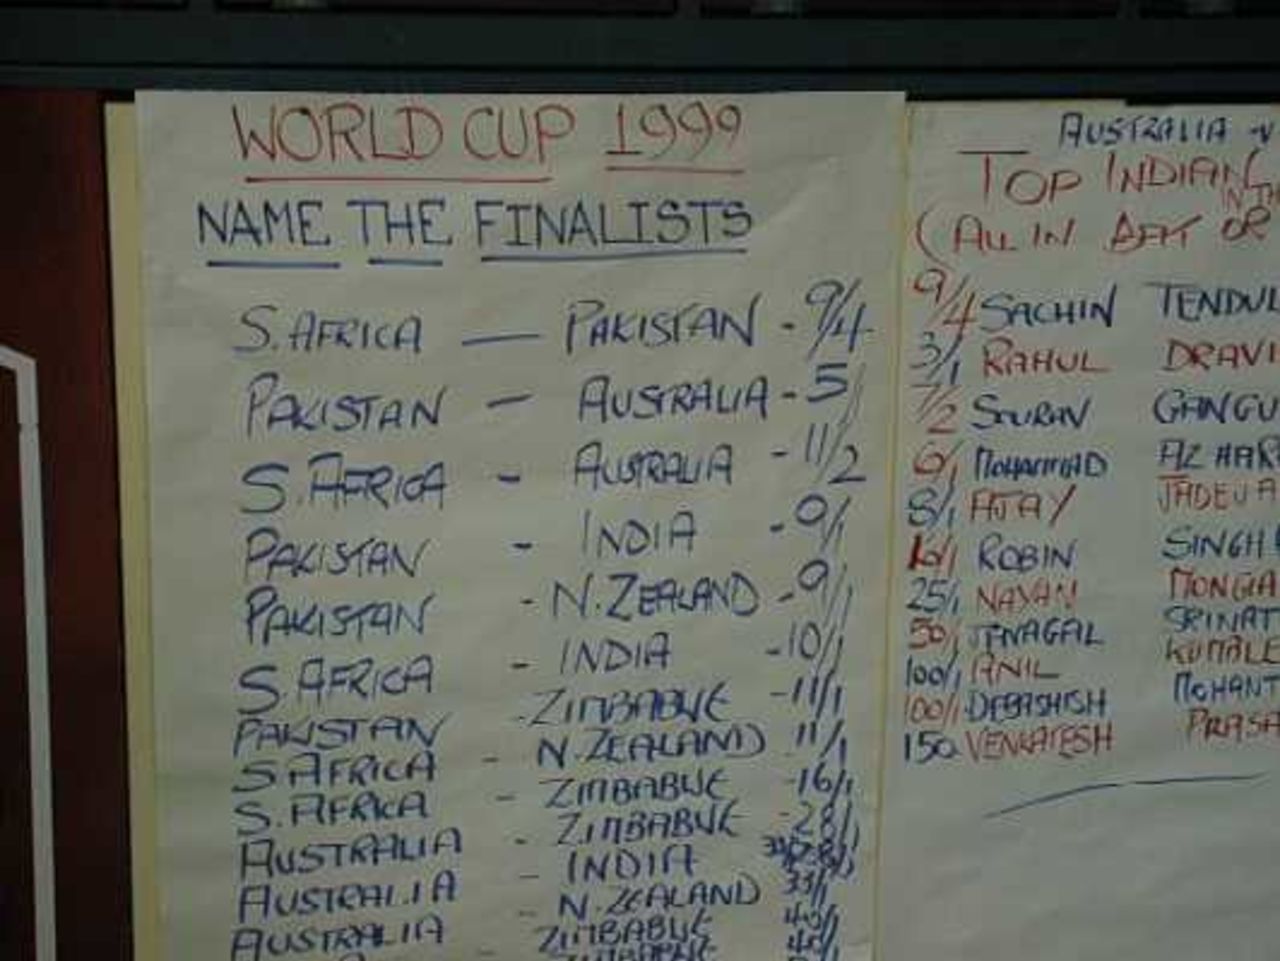 The results of a poll, WC99